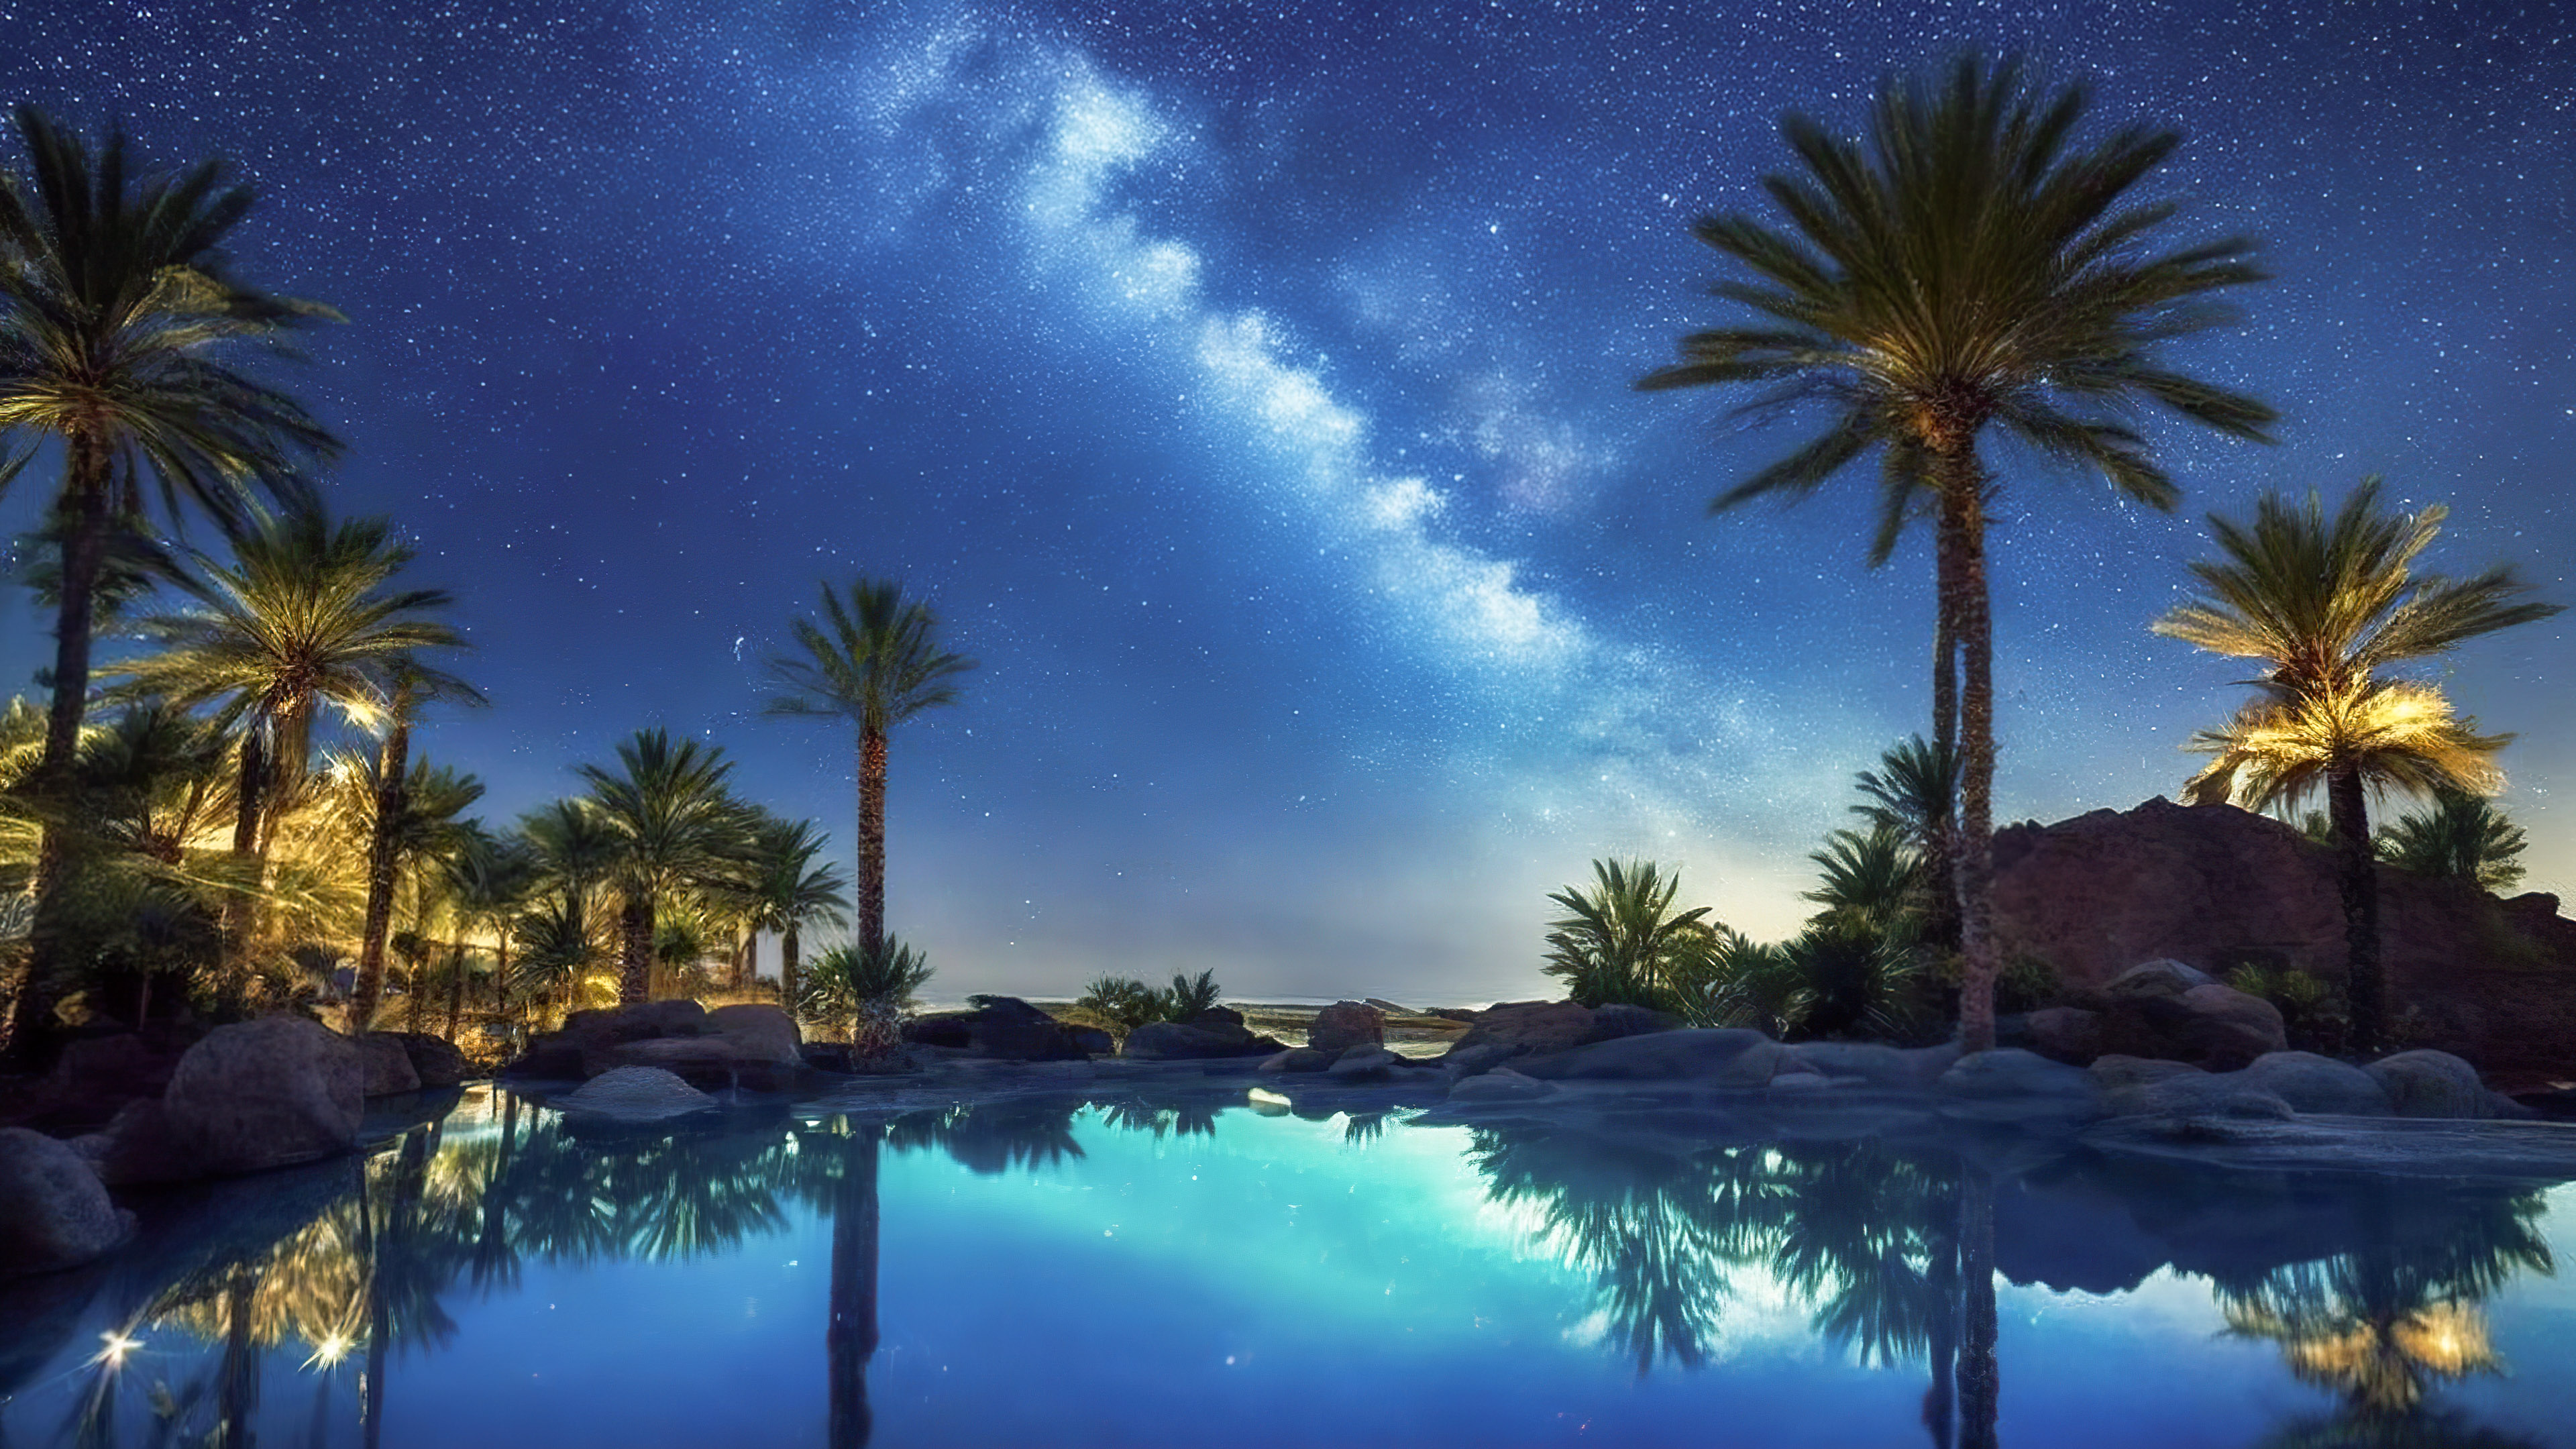 Adorn your device with evening sky wallpaper, capturing a desert oasis under the Milky Way, where palm trees surround a serene, starry pool.